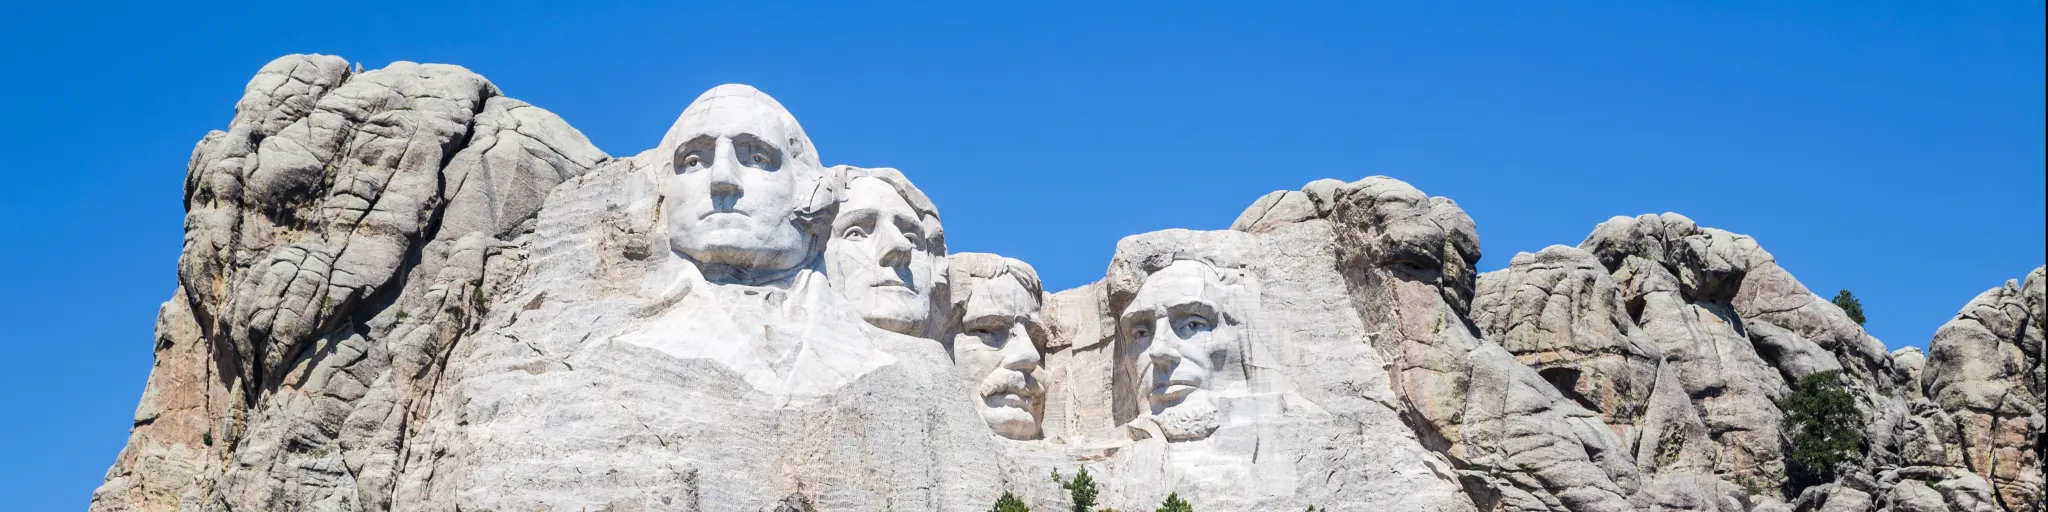 Shows the faces of past US presidents carved on granite as a massive sculpture on Mount Rushmore during a sunny day